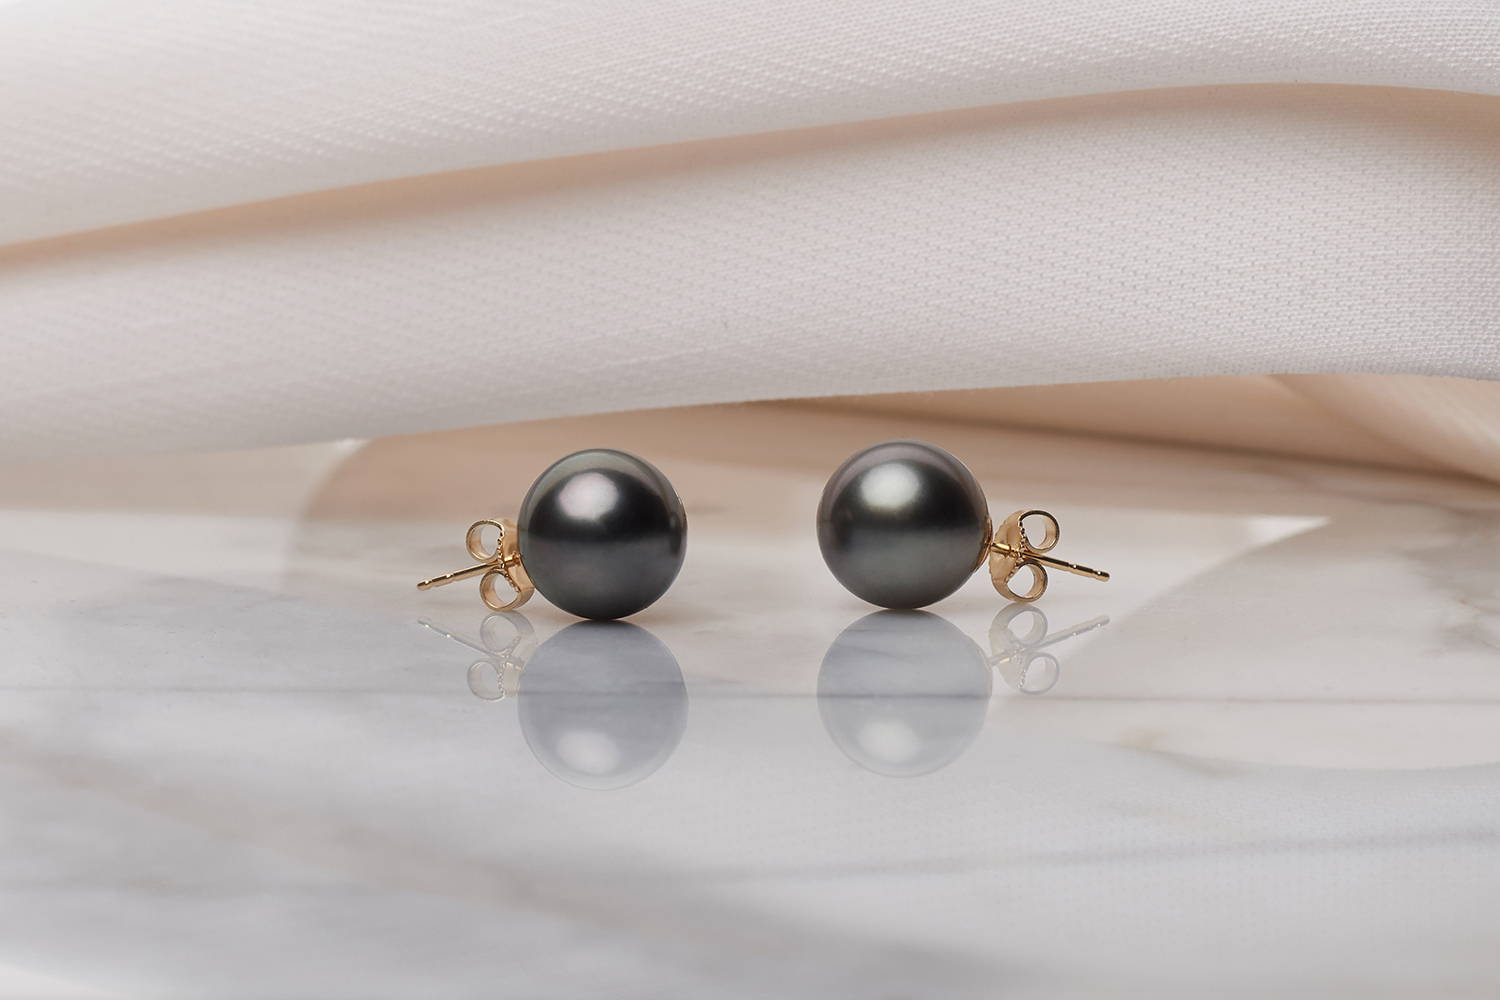 Black Tahitian Pearl Earrings with Yelloow Gold Posts on Pink Fabric Background